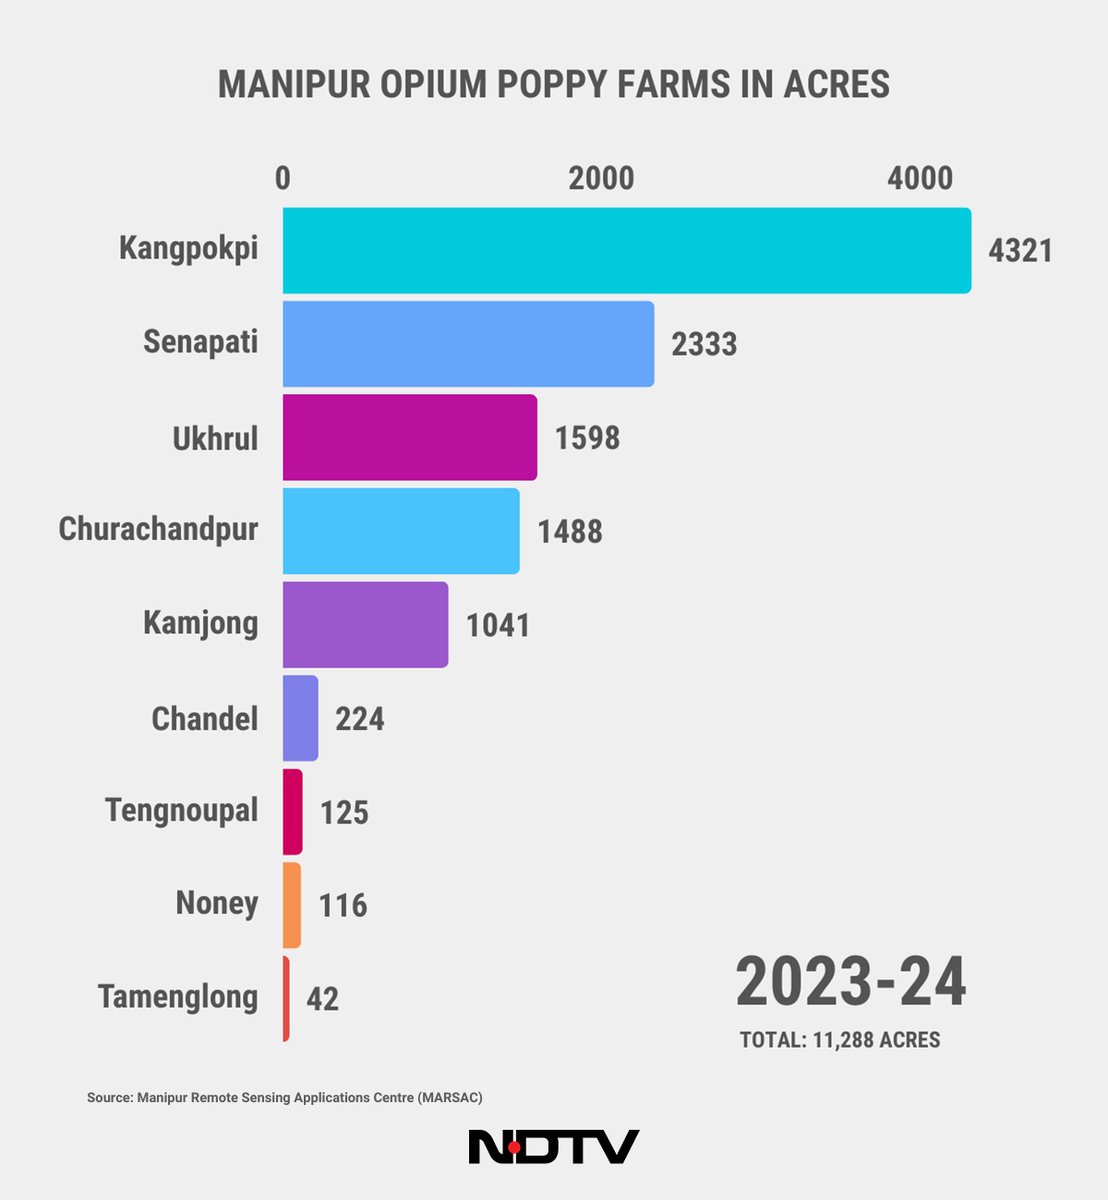 #Exclusive: End Of Opium Poppy Cultivation In Manipur Soon? Satellite Imagery Data Shows...
ndtv.com/india-news/exc…